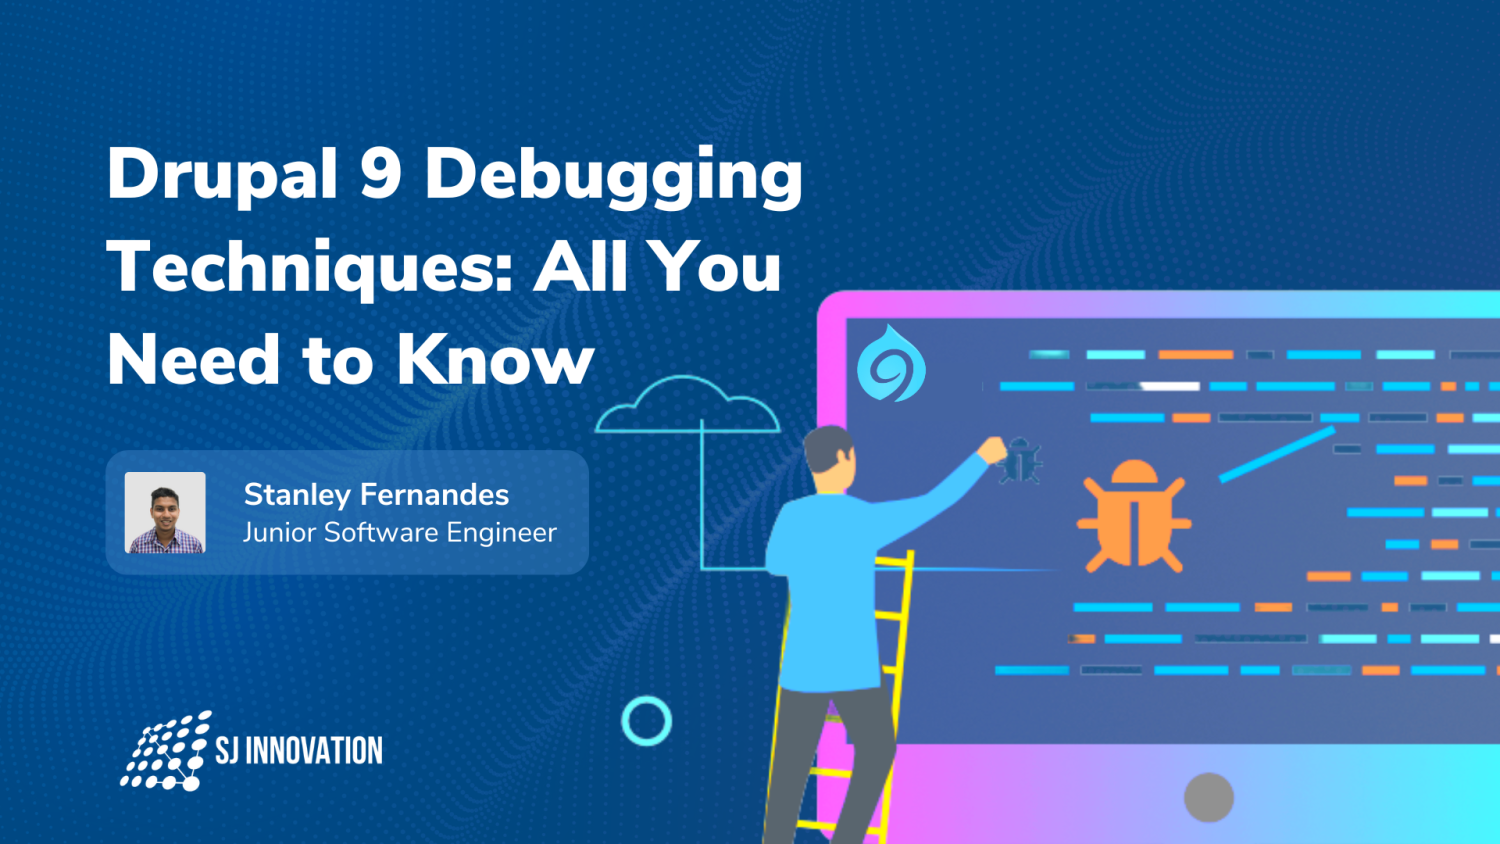 Drupal 9 Debugging Techniques: All You Need to Know